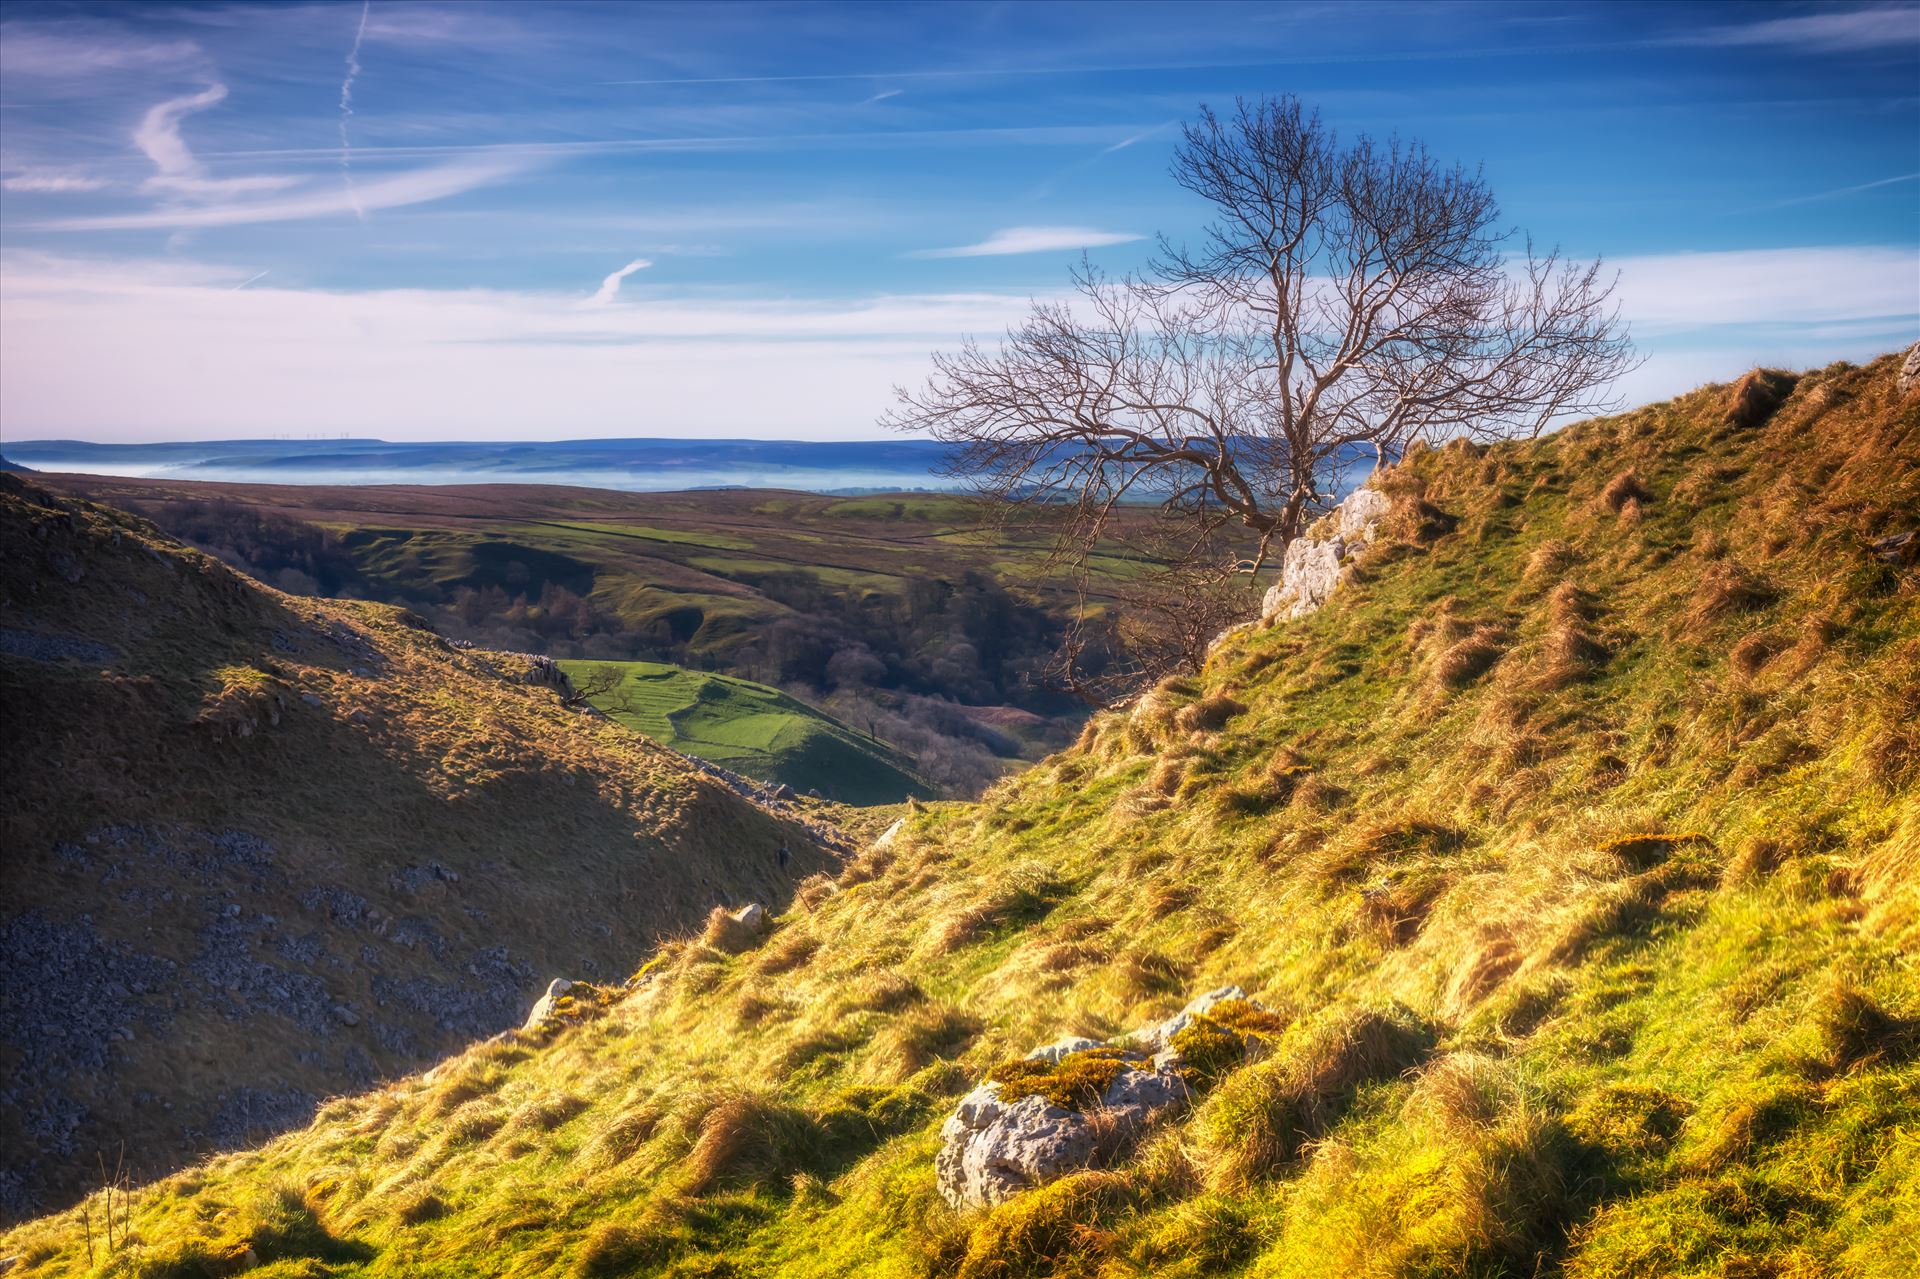 High above the valley - This lone tree sits high above the village of Malham in the Yorkshire Dales. by philreay